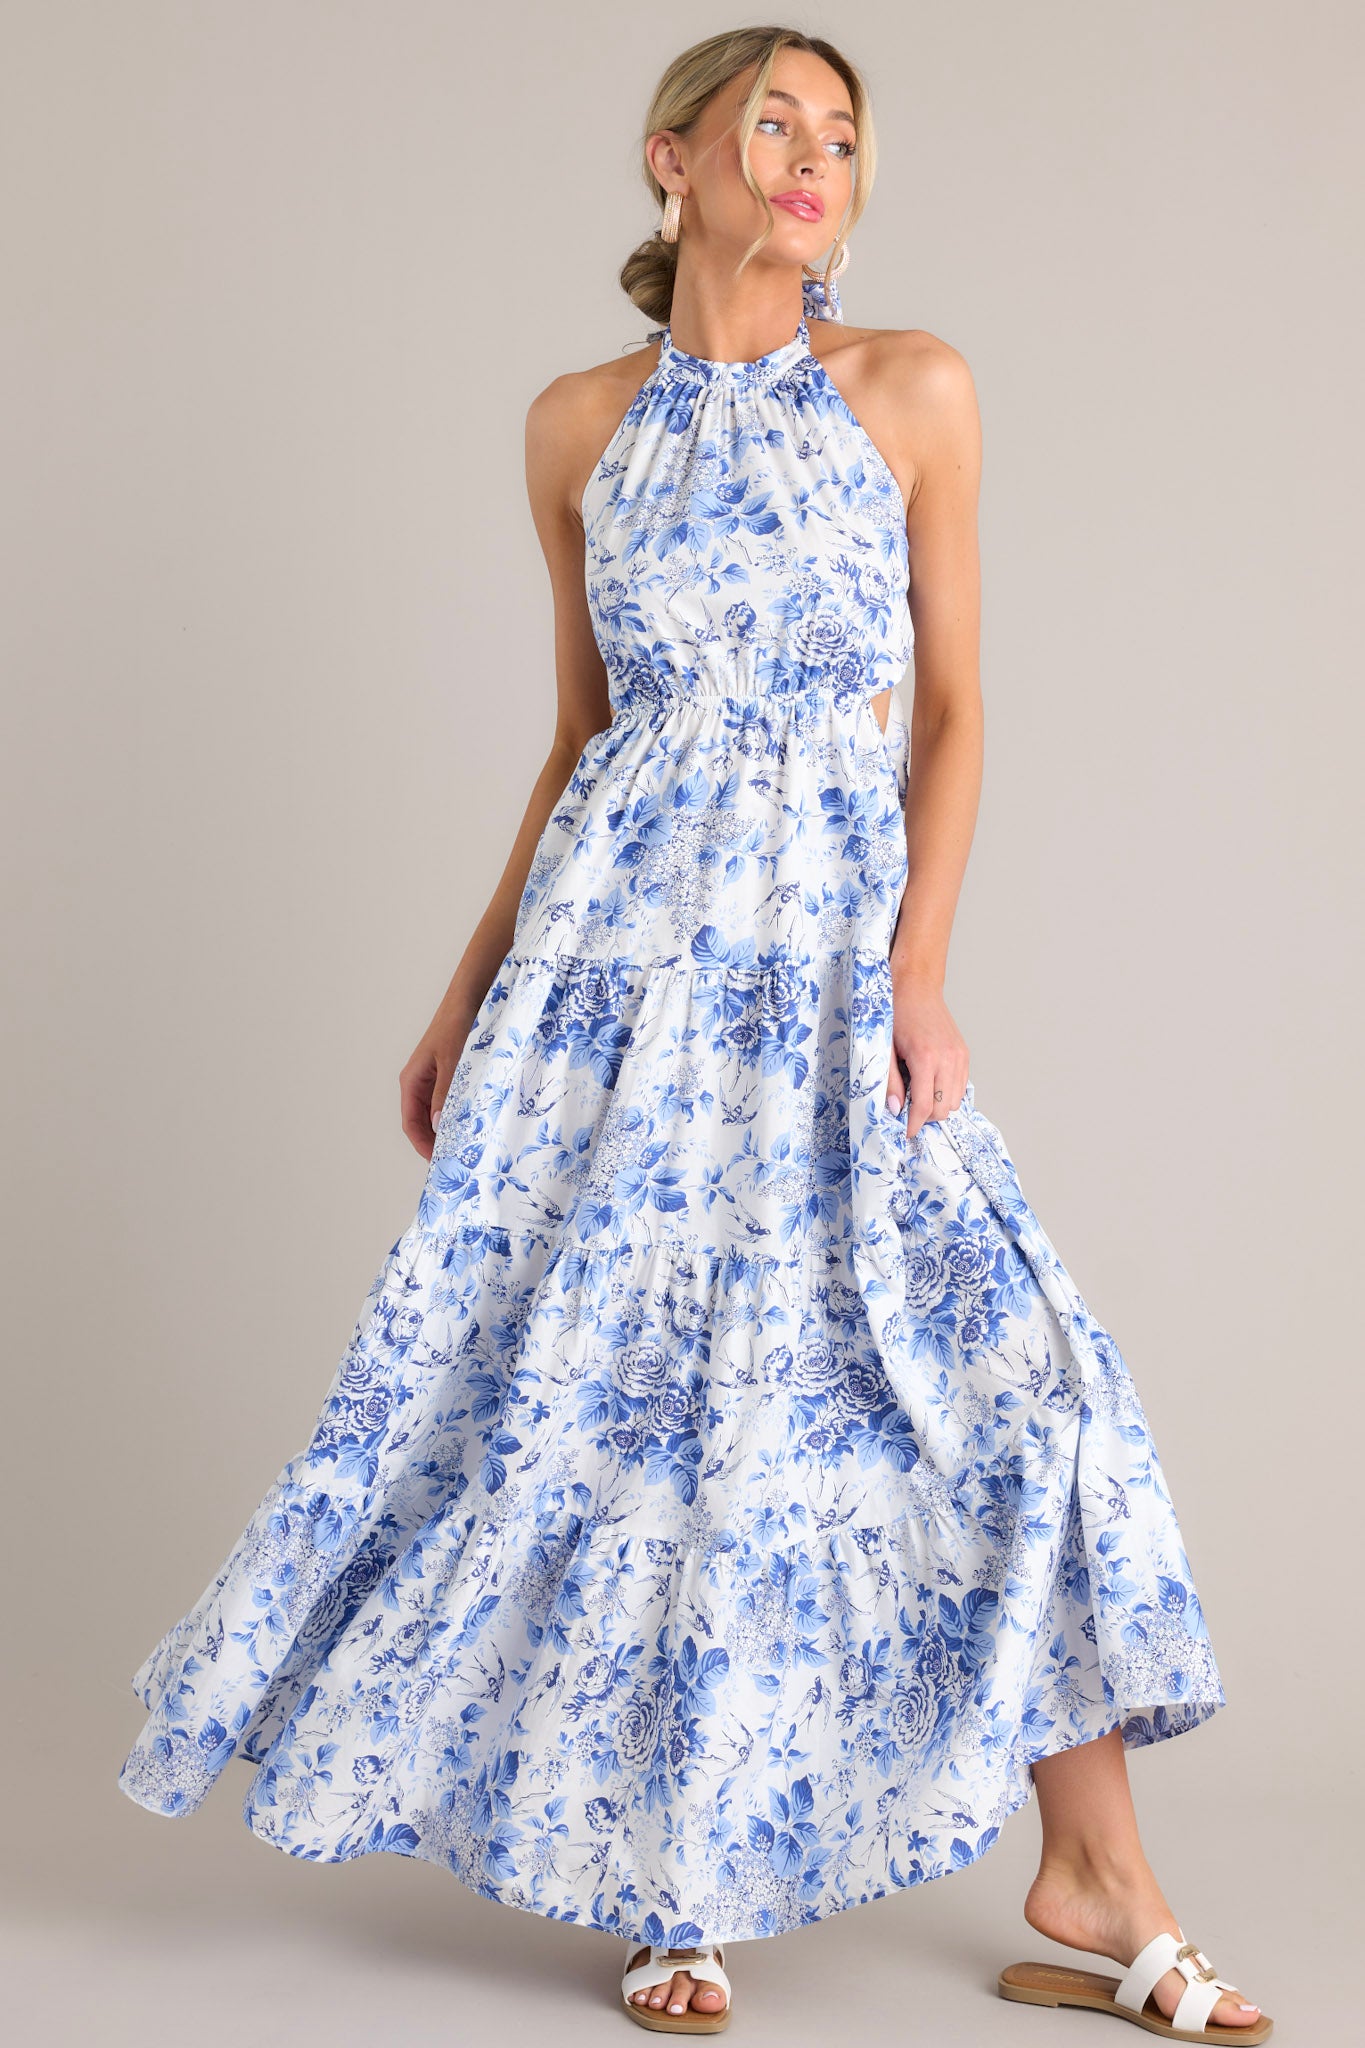 This floral maxi dress features a self-tie halter neckline, an open back, a self-tie back feature, an elastic waistband, side cutouts, and a tiered design.